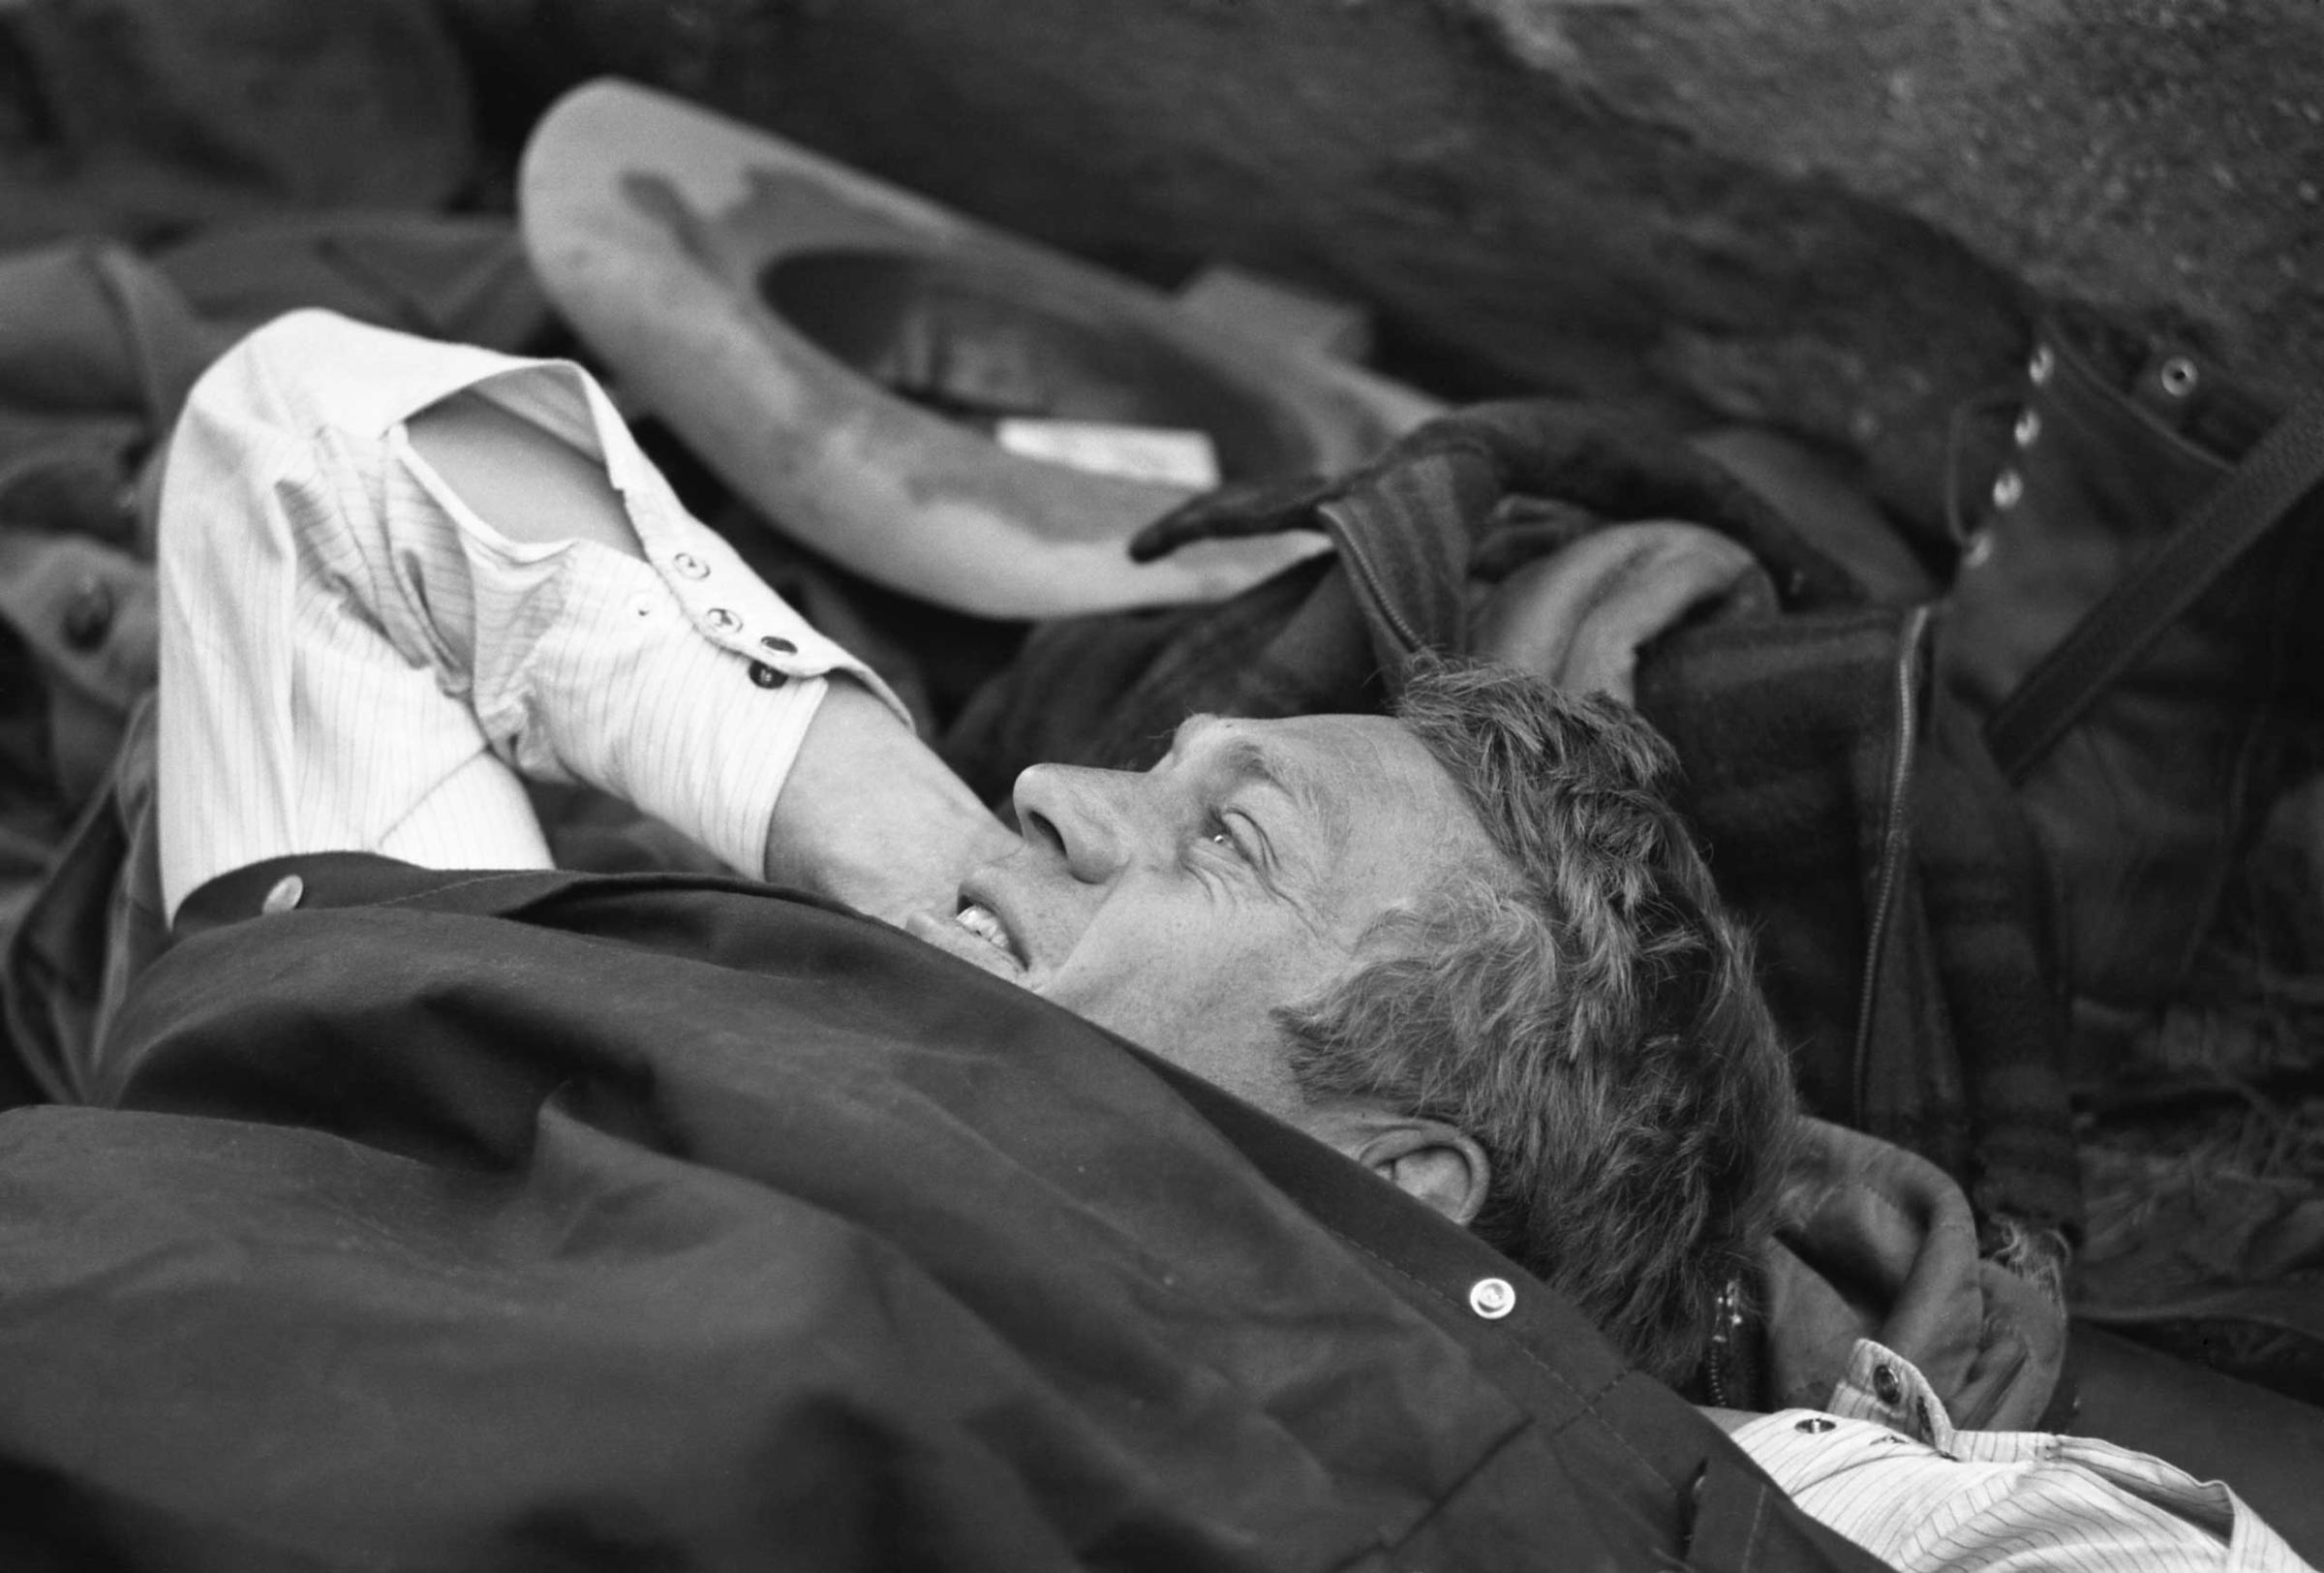 Steve McQueen in his sleeping bag on a camping trip, 1963. "This is it, man," he told LIFE. "I'd rather wake up in the middle of nowhere than in any city on earth."